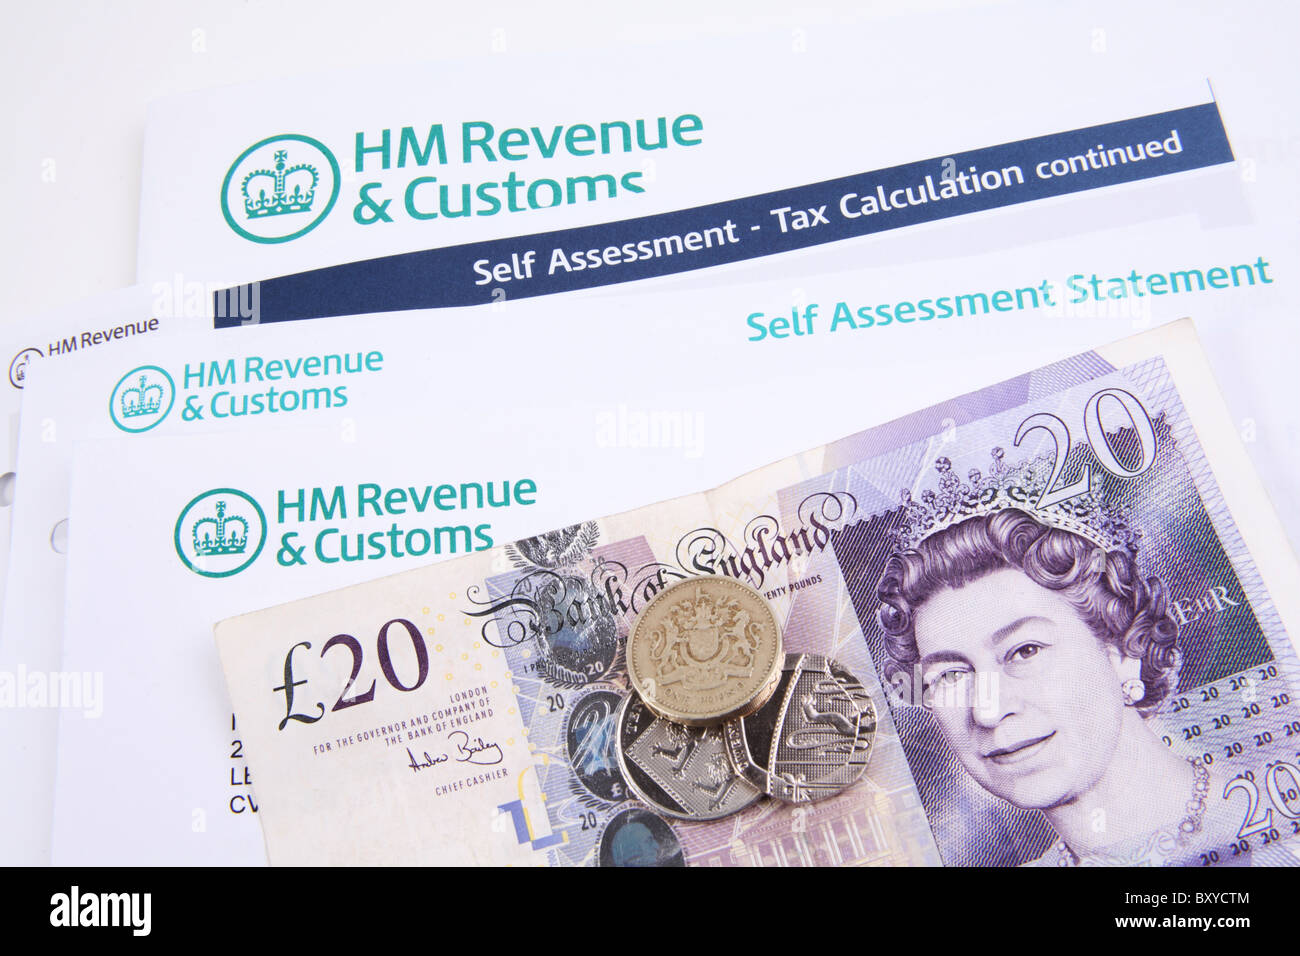 HM Revenues and Customs; Complex Tax and Self Assessment Concept Stock Photo